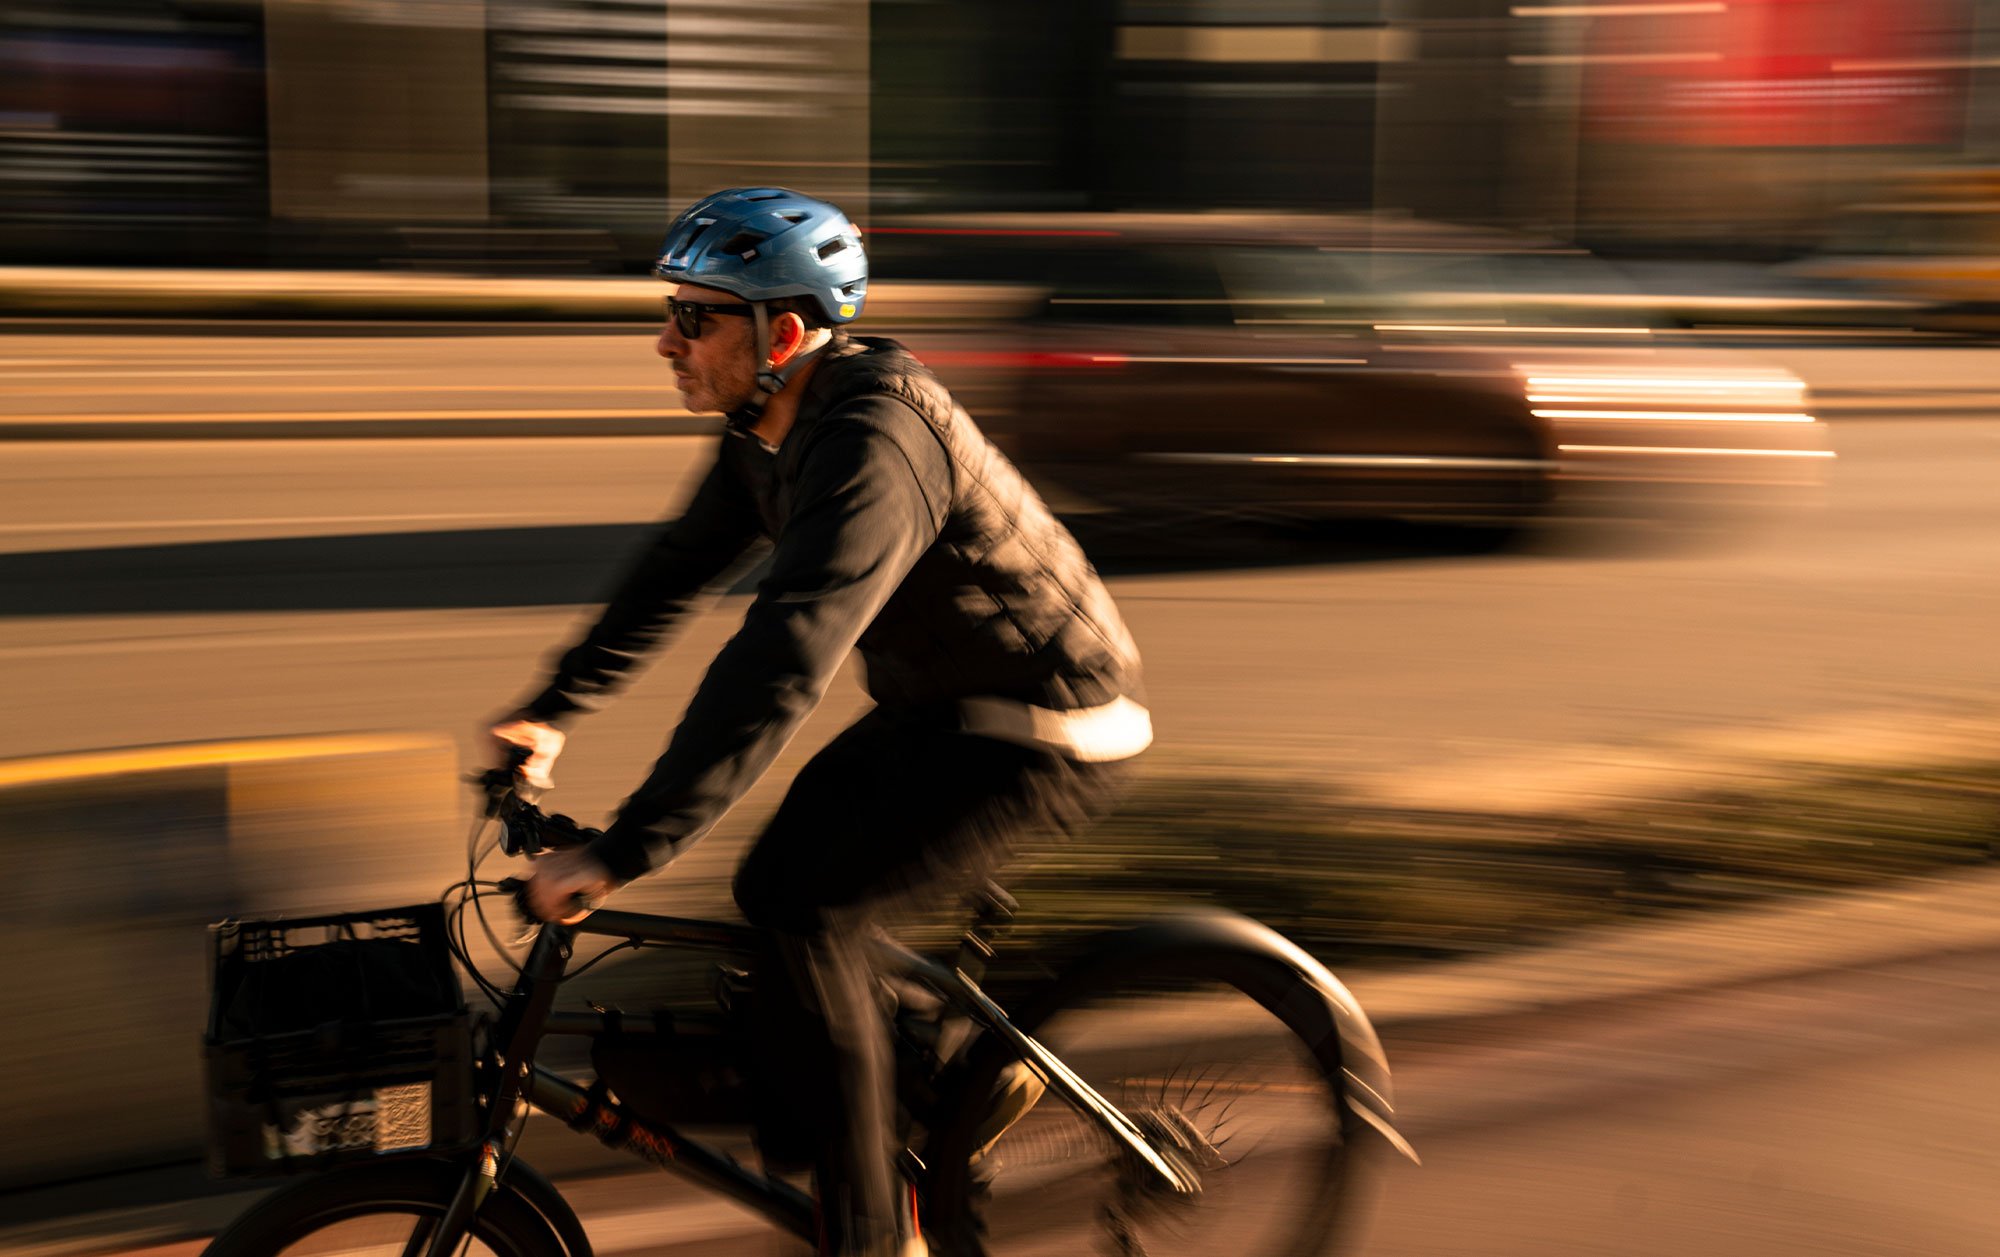 MET E-Mob Mips is an E-Bike Urban Helmet with Rear USB LED light and it is NTA 8776 Certified.